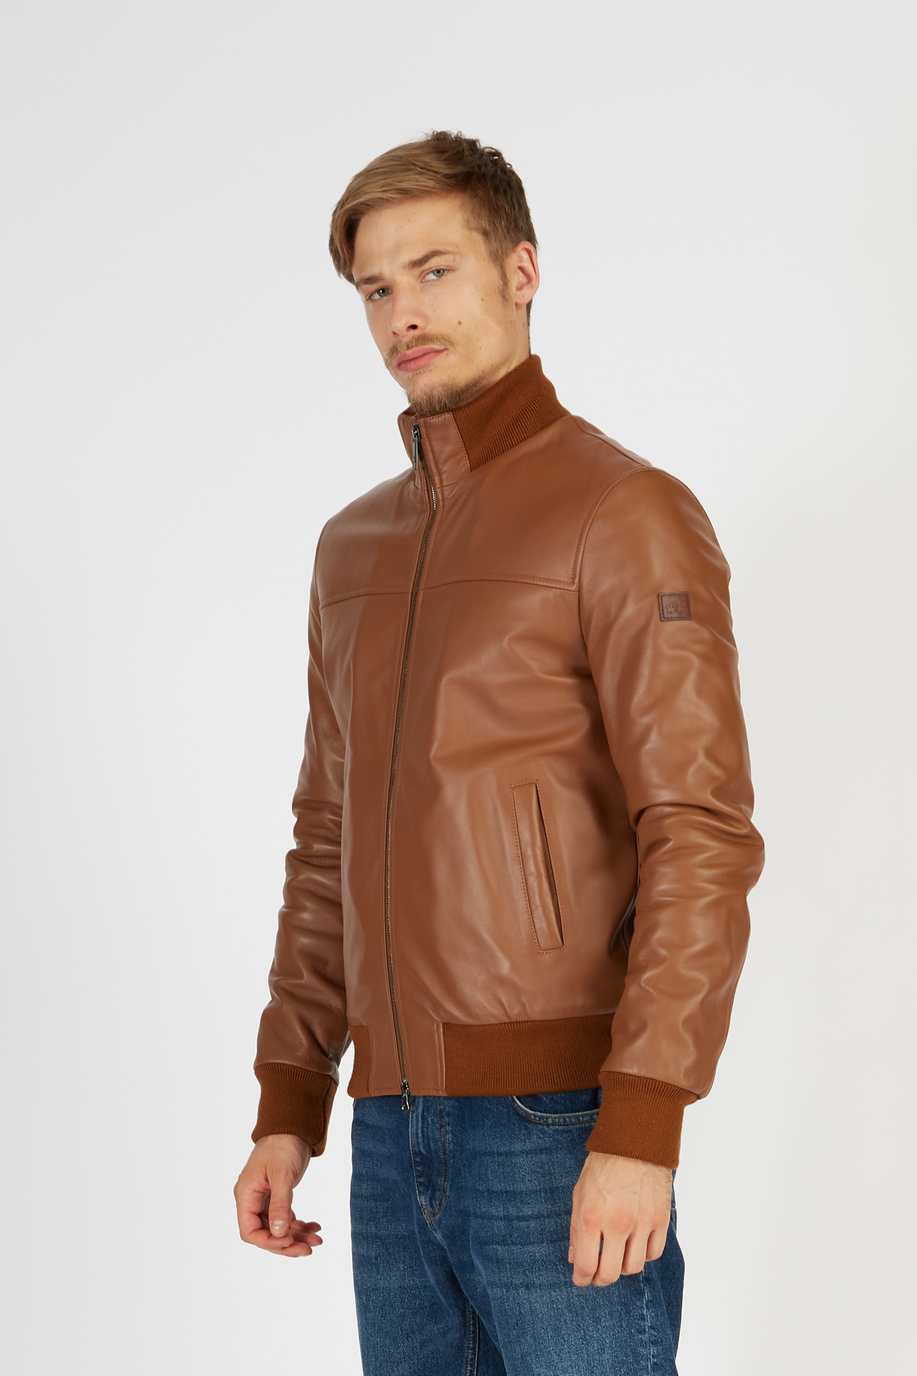 Blue Ribbon leather jacket with regular fit zip front closure - Outerwear and Jackets | La Martina - Official Online Shop